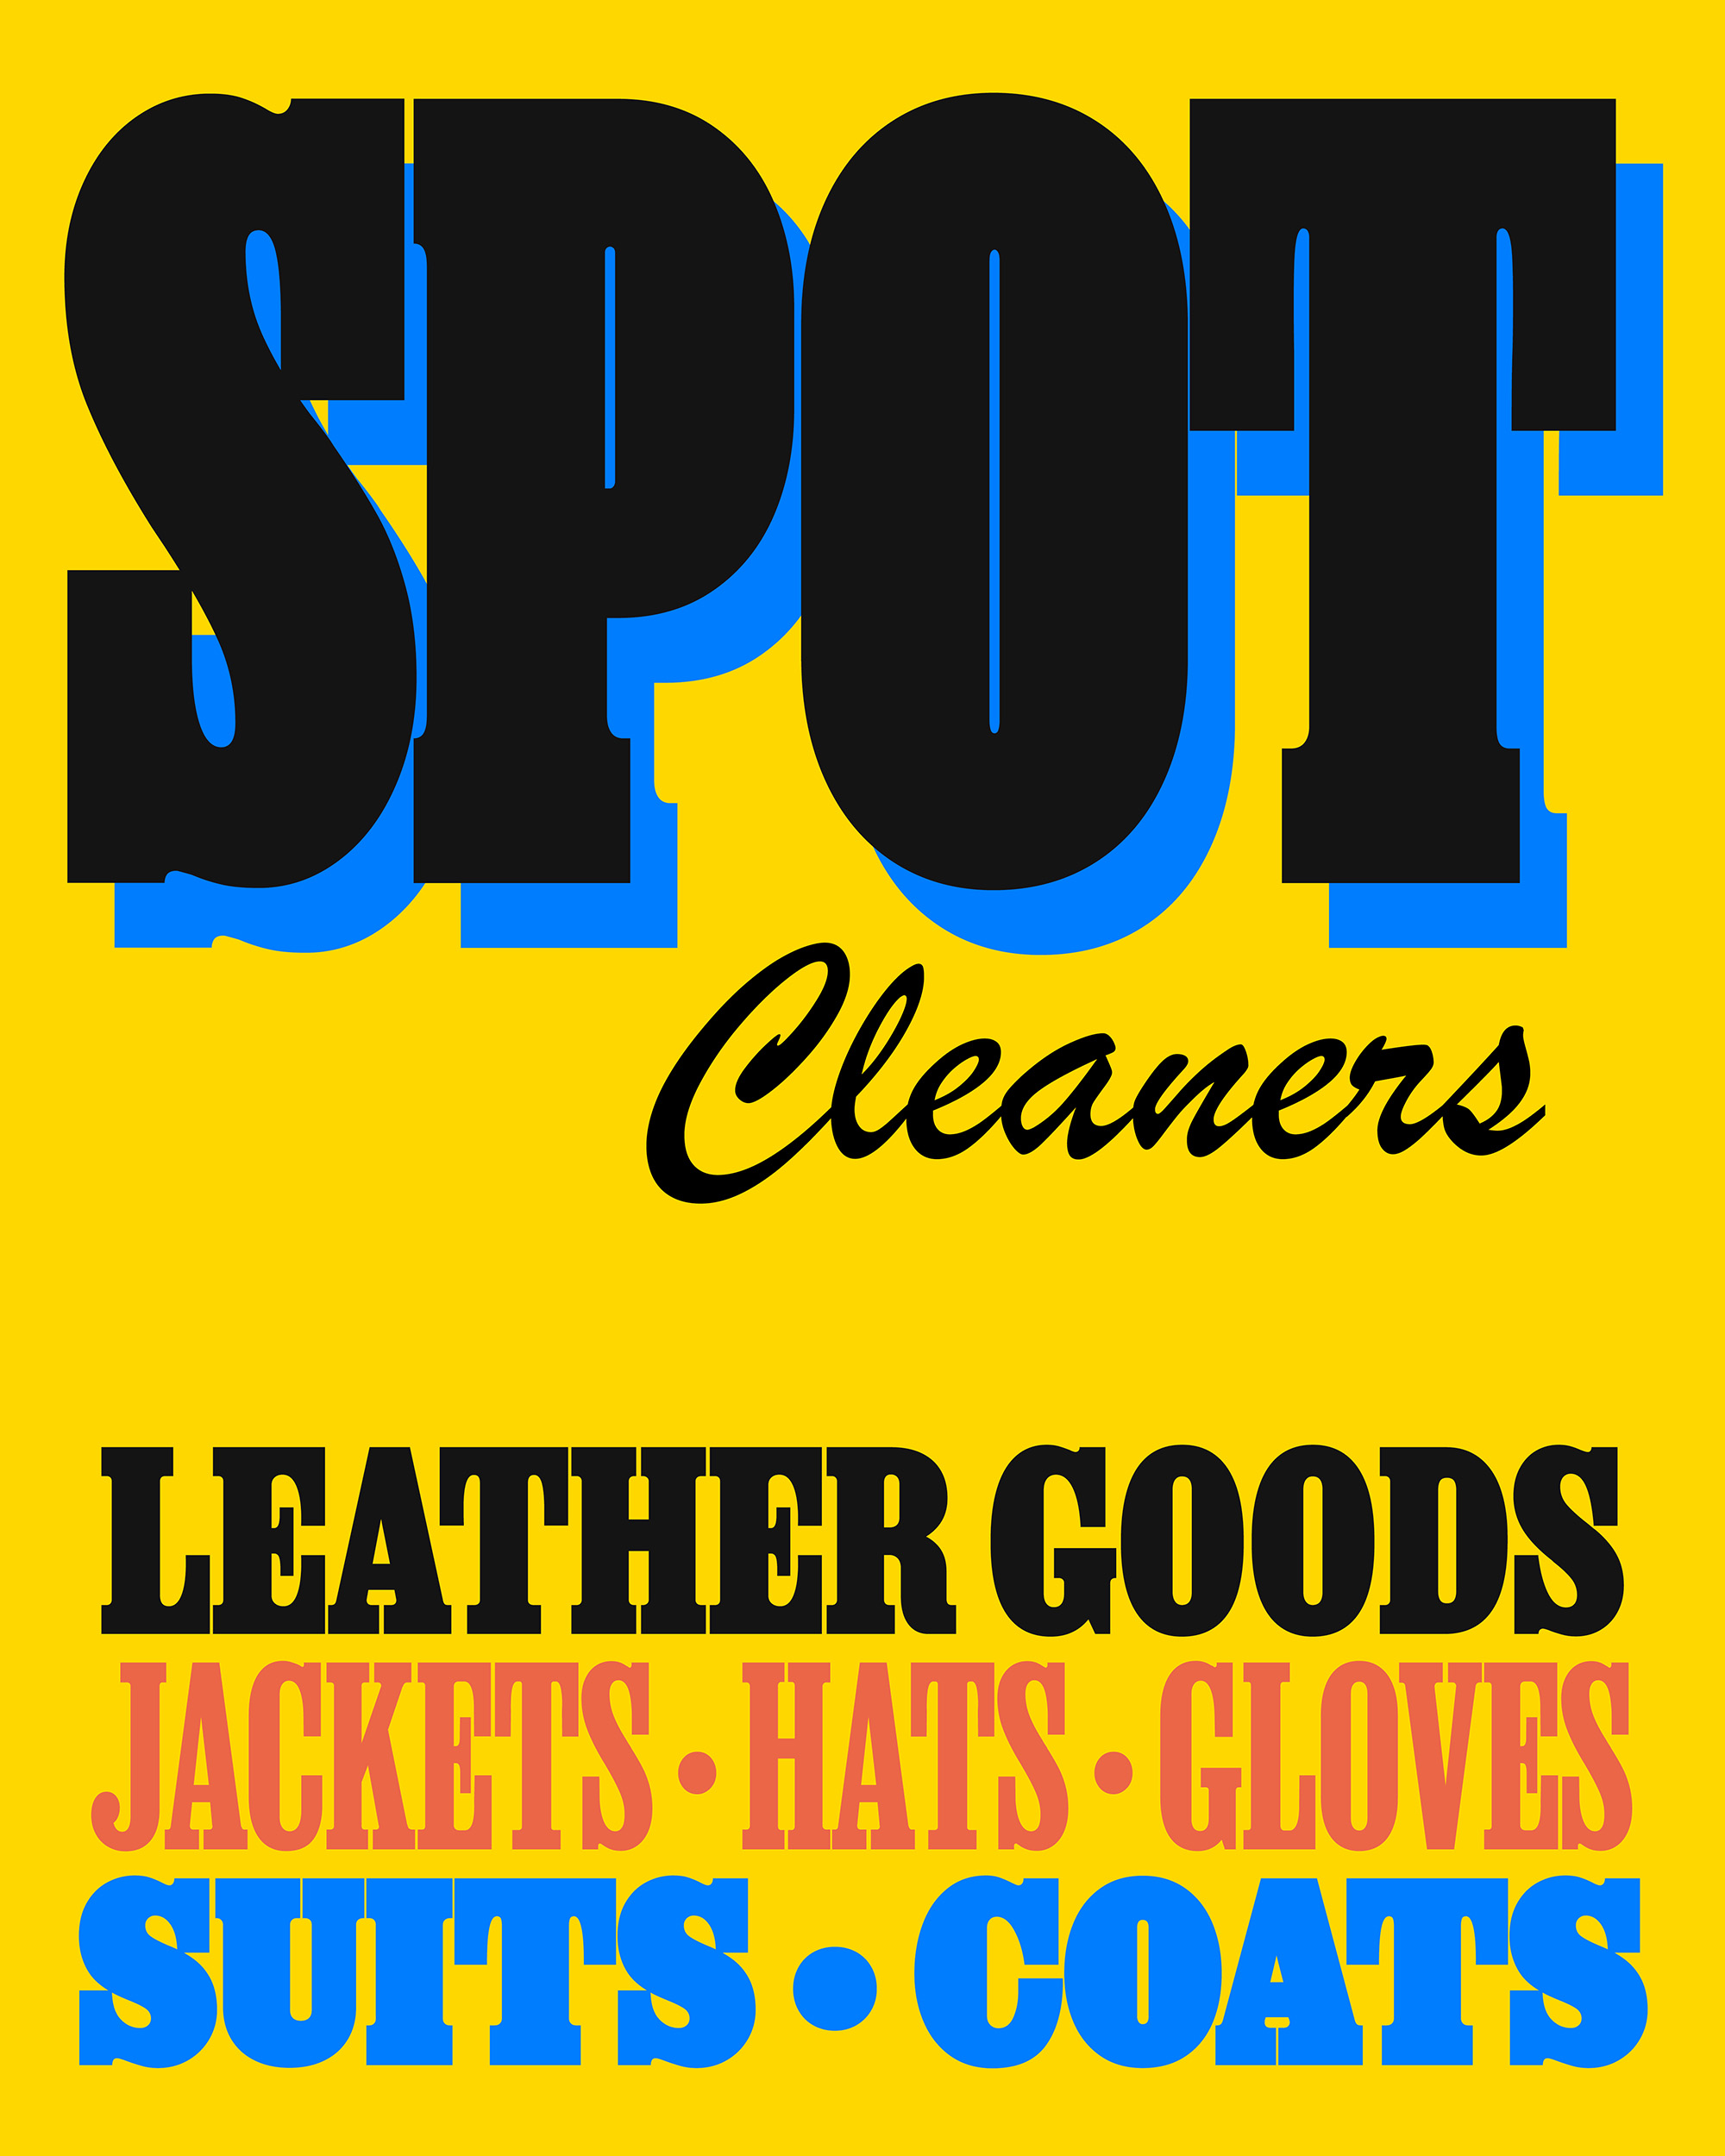 SPOT Cleaners; Leather Goods, Jackets, Hats, Gloves, Suits & Coats